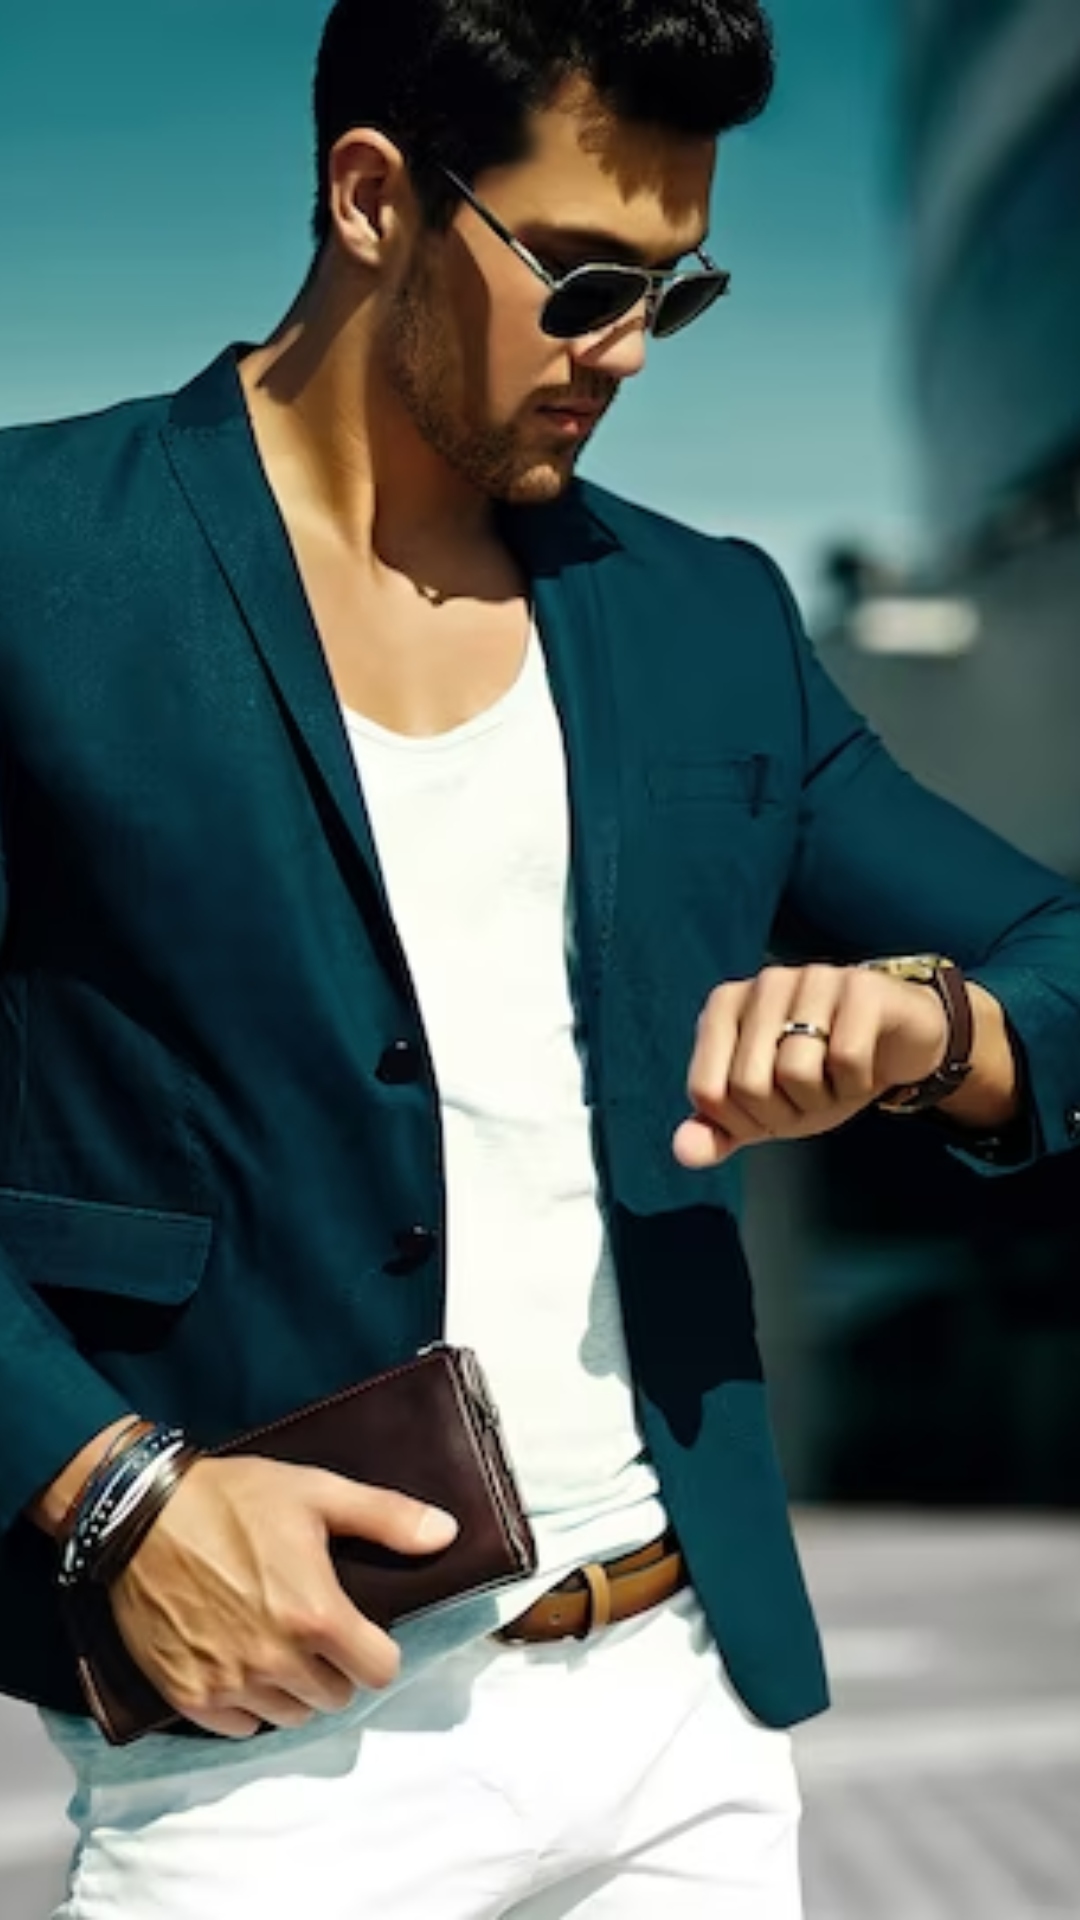 Why do men wear their watches on the left hand?